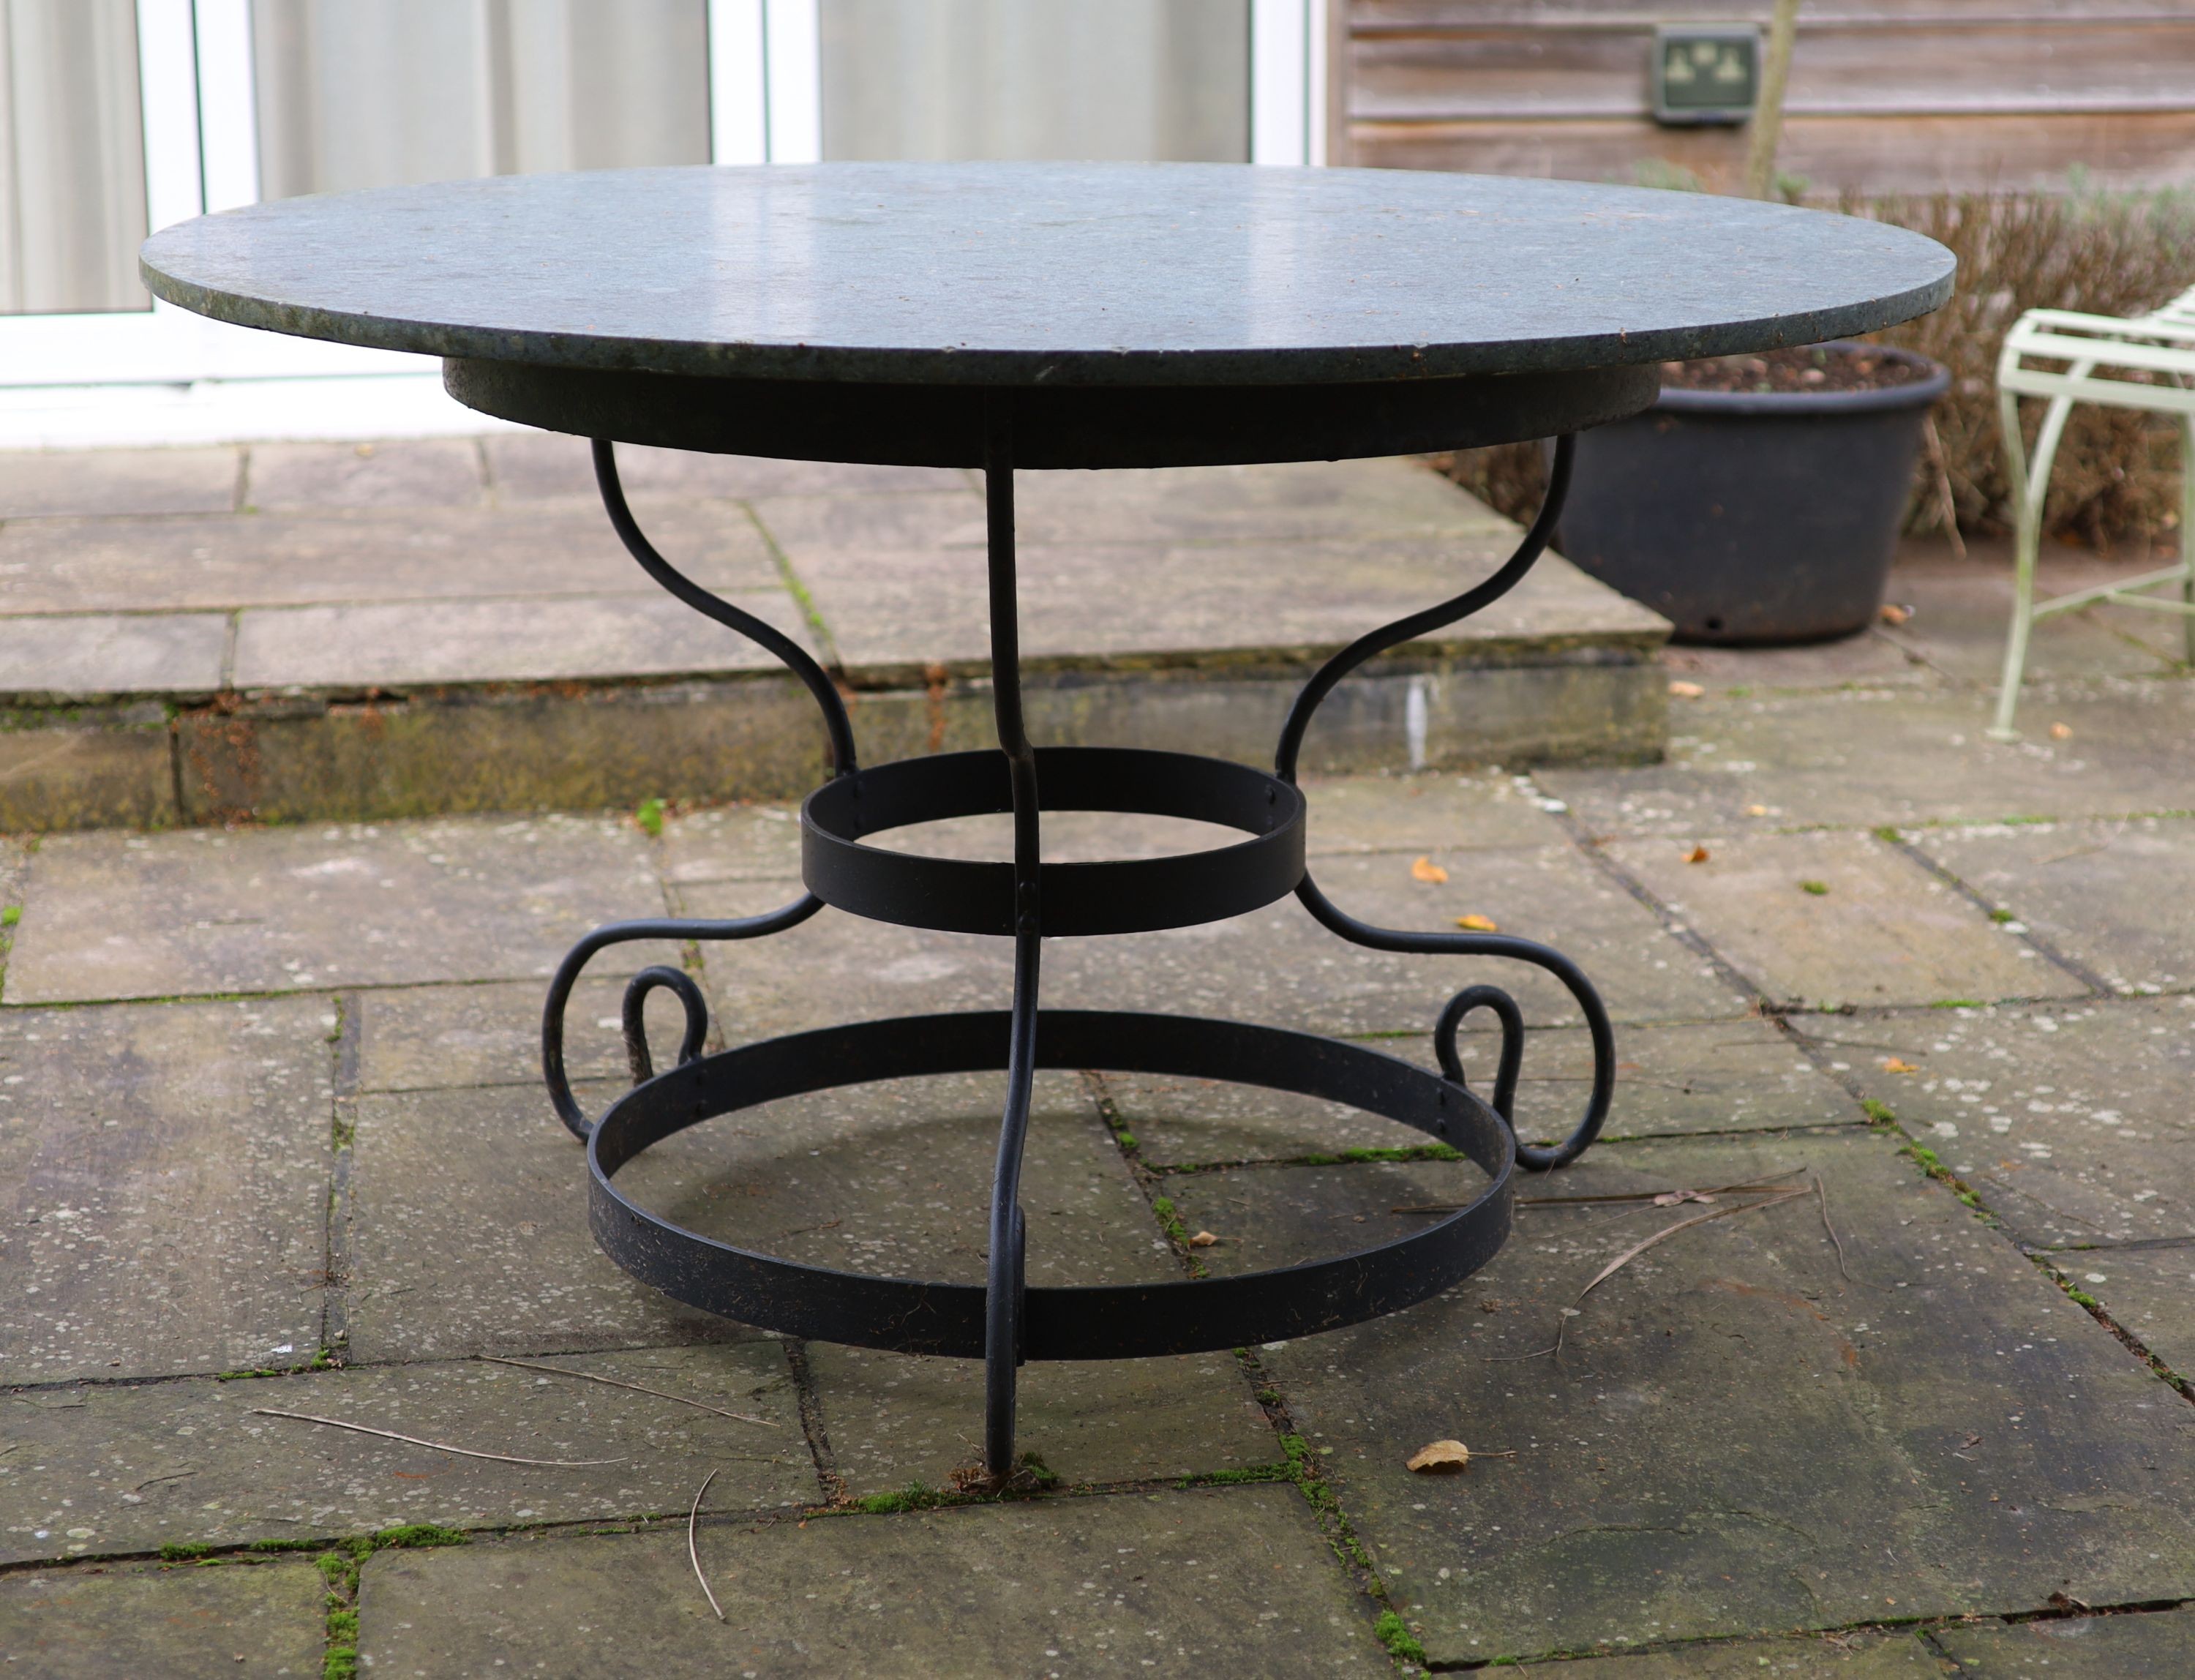 A wrought iron garden table with circular green marble top, width 123cm height 75cm